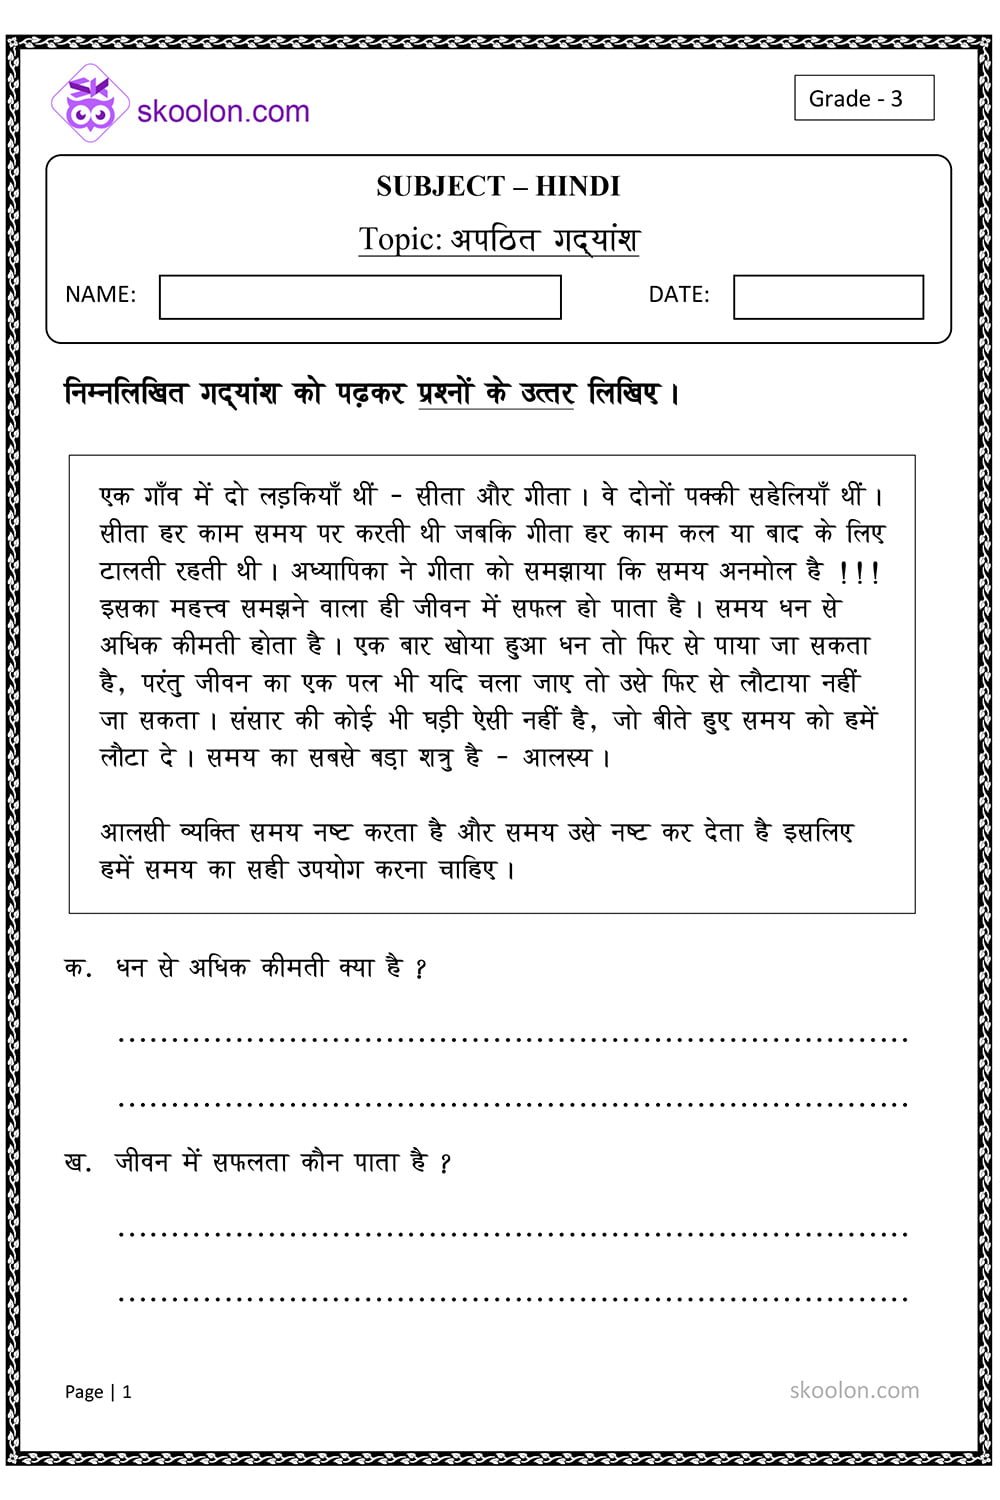 download-english-grade-4-worksheet-for-class-4-pdf-online-2021